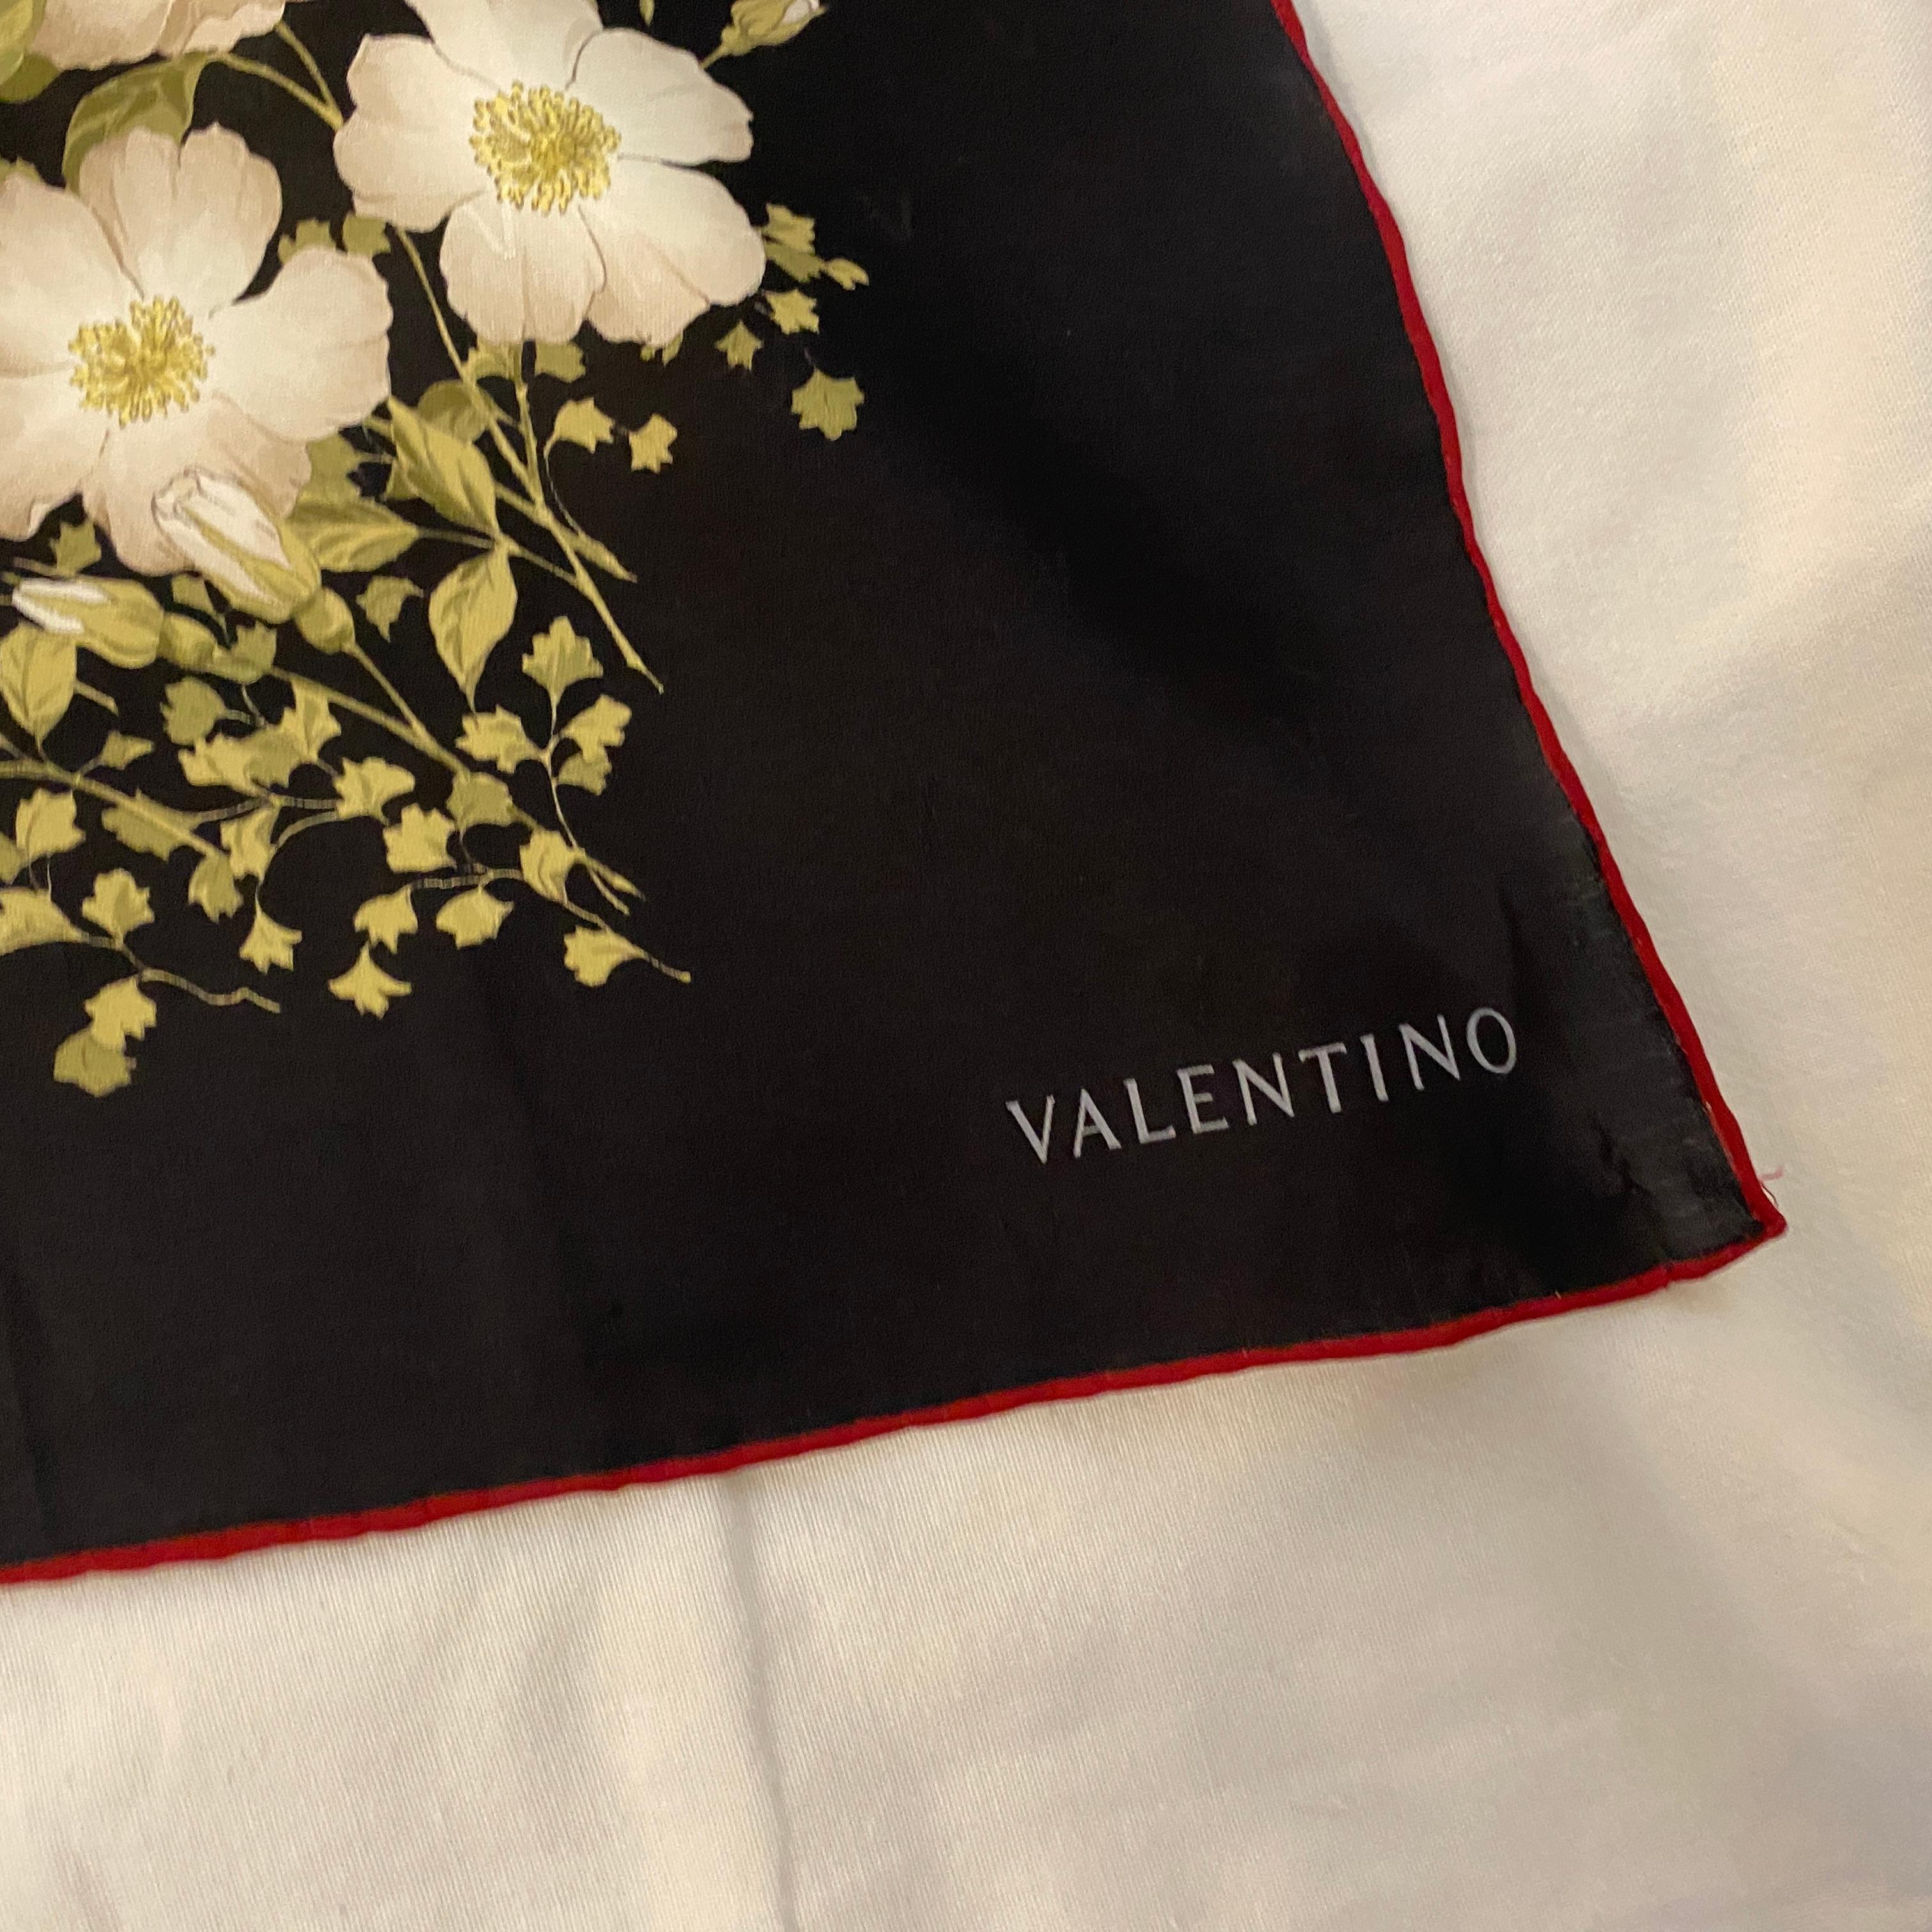 A perfect conditions classic flowers silk foulard manufactured in Italy by Valentino